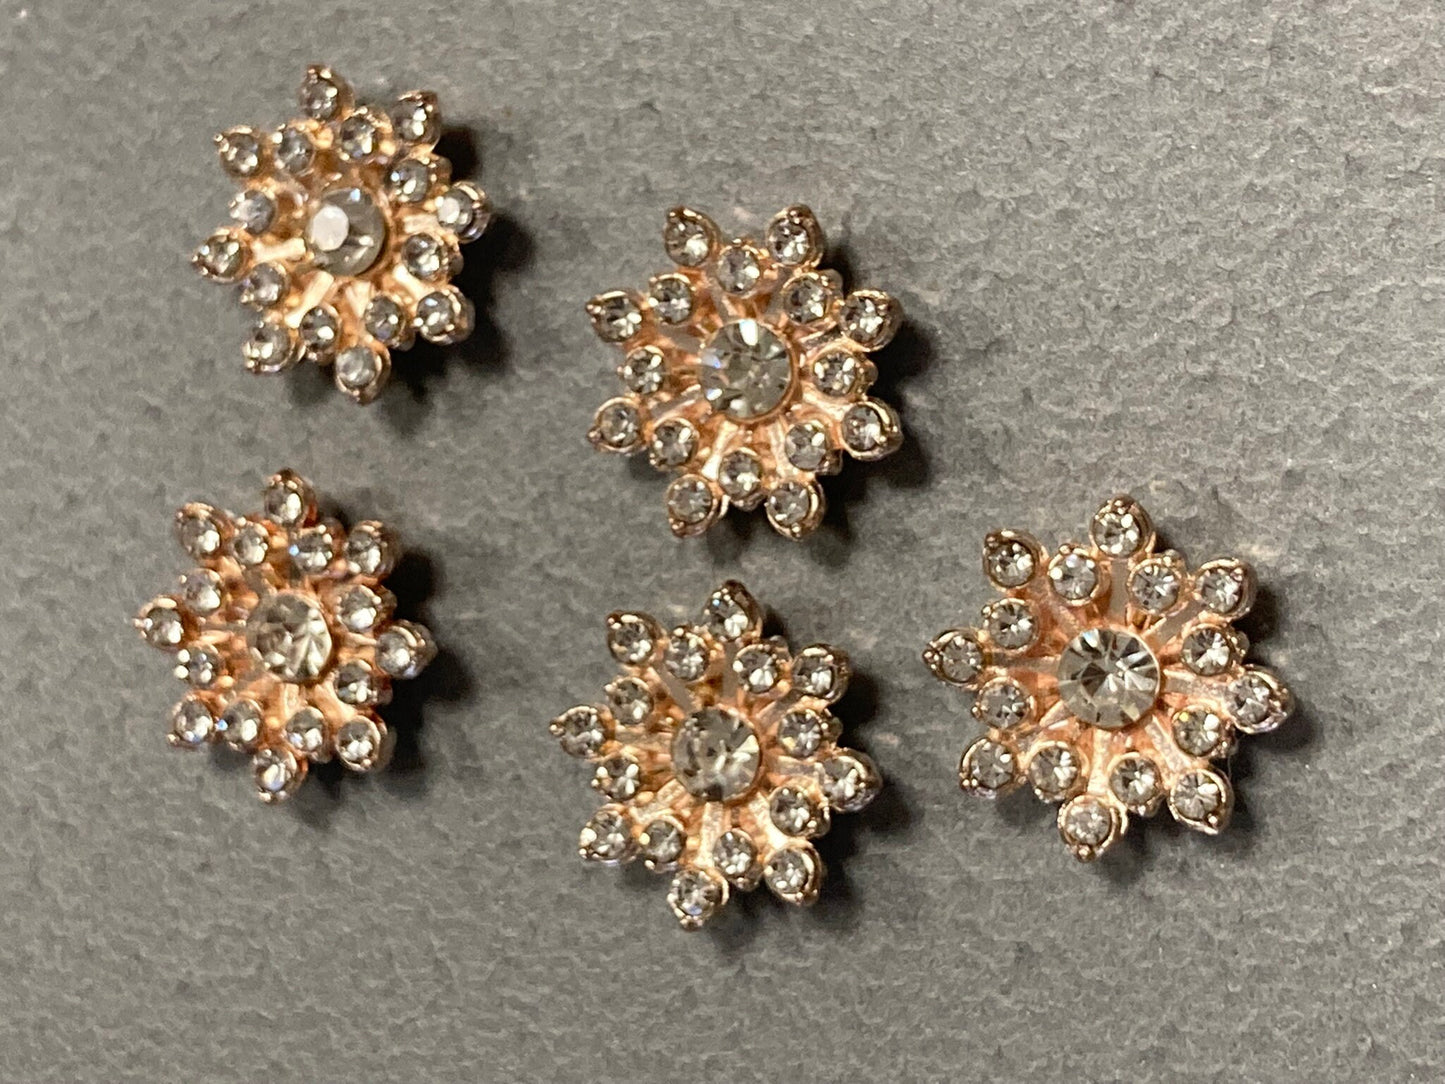 16mm Set of 5 gold metal flat backed diamante crystal rhinestone embellishments for crafts